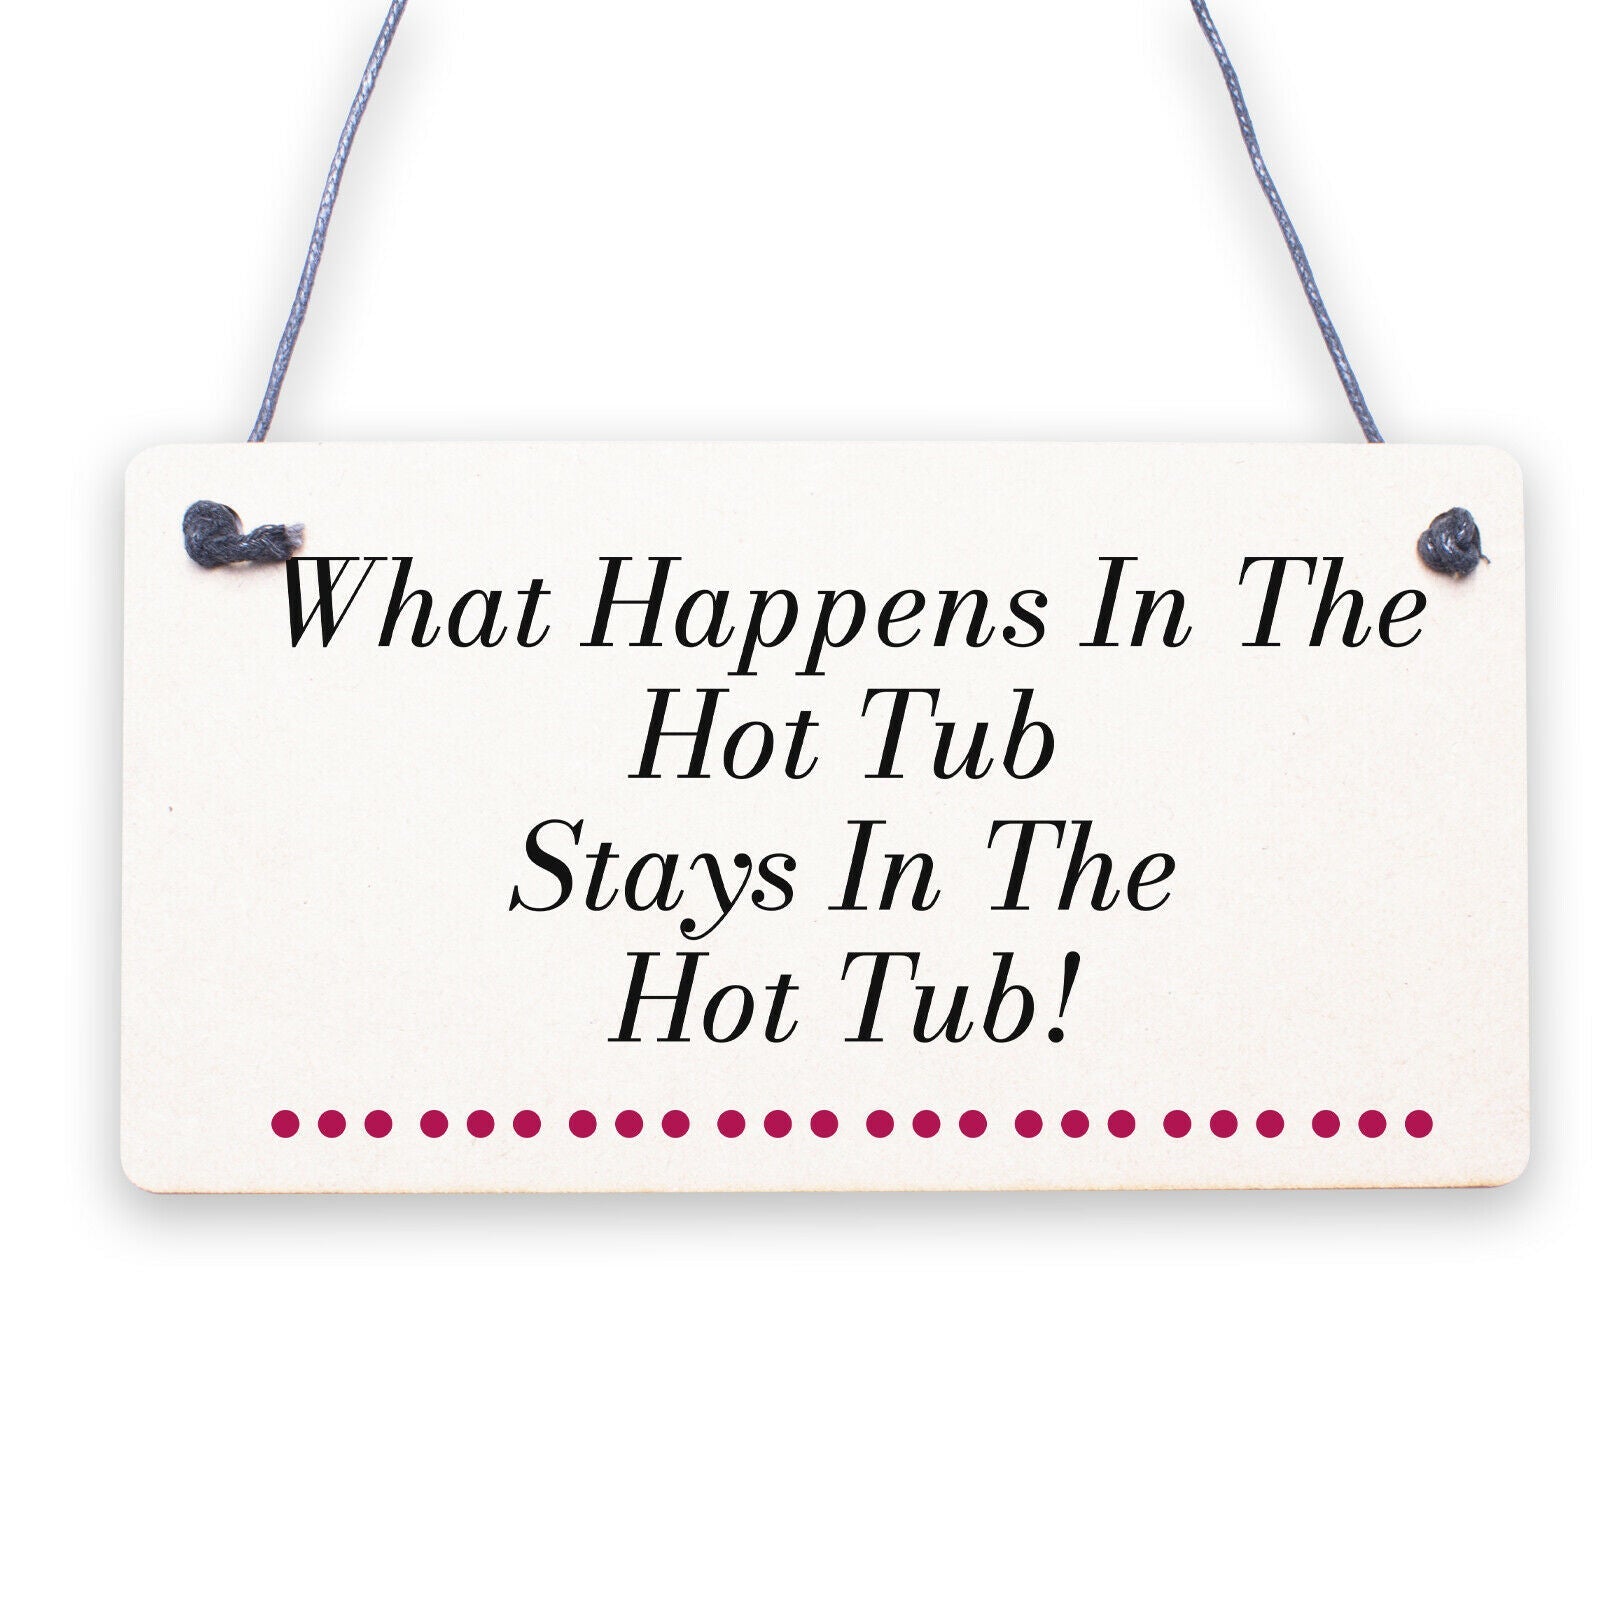 Hot Tub Novelty Funny Garden Hanging Wall Plaque Shed Jaccuzi Home Decor Sign